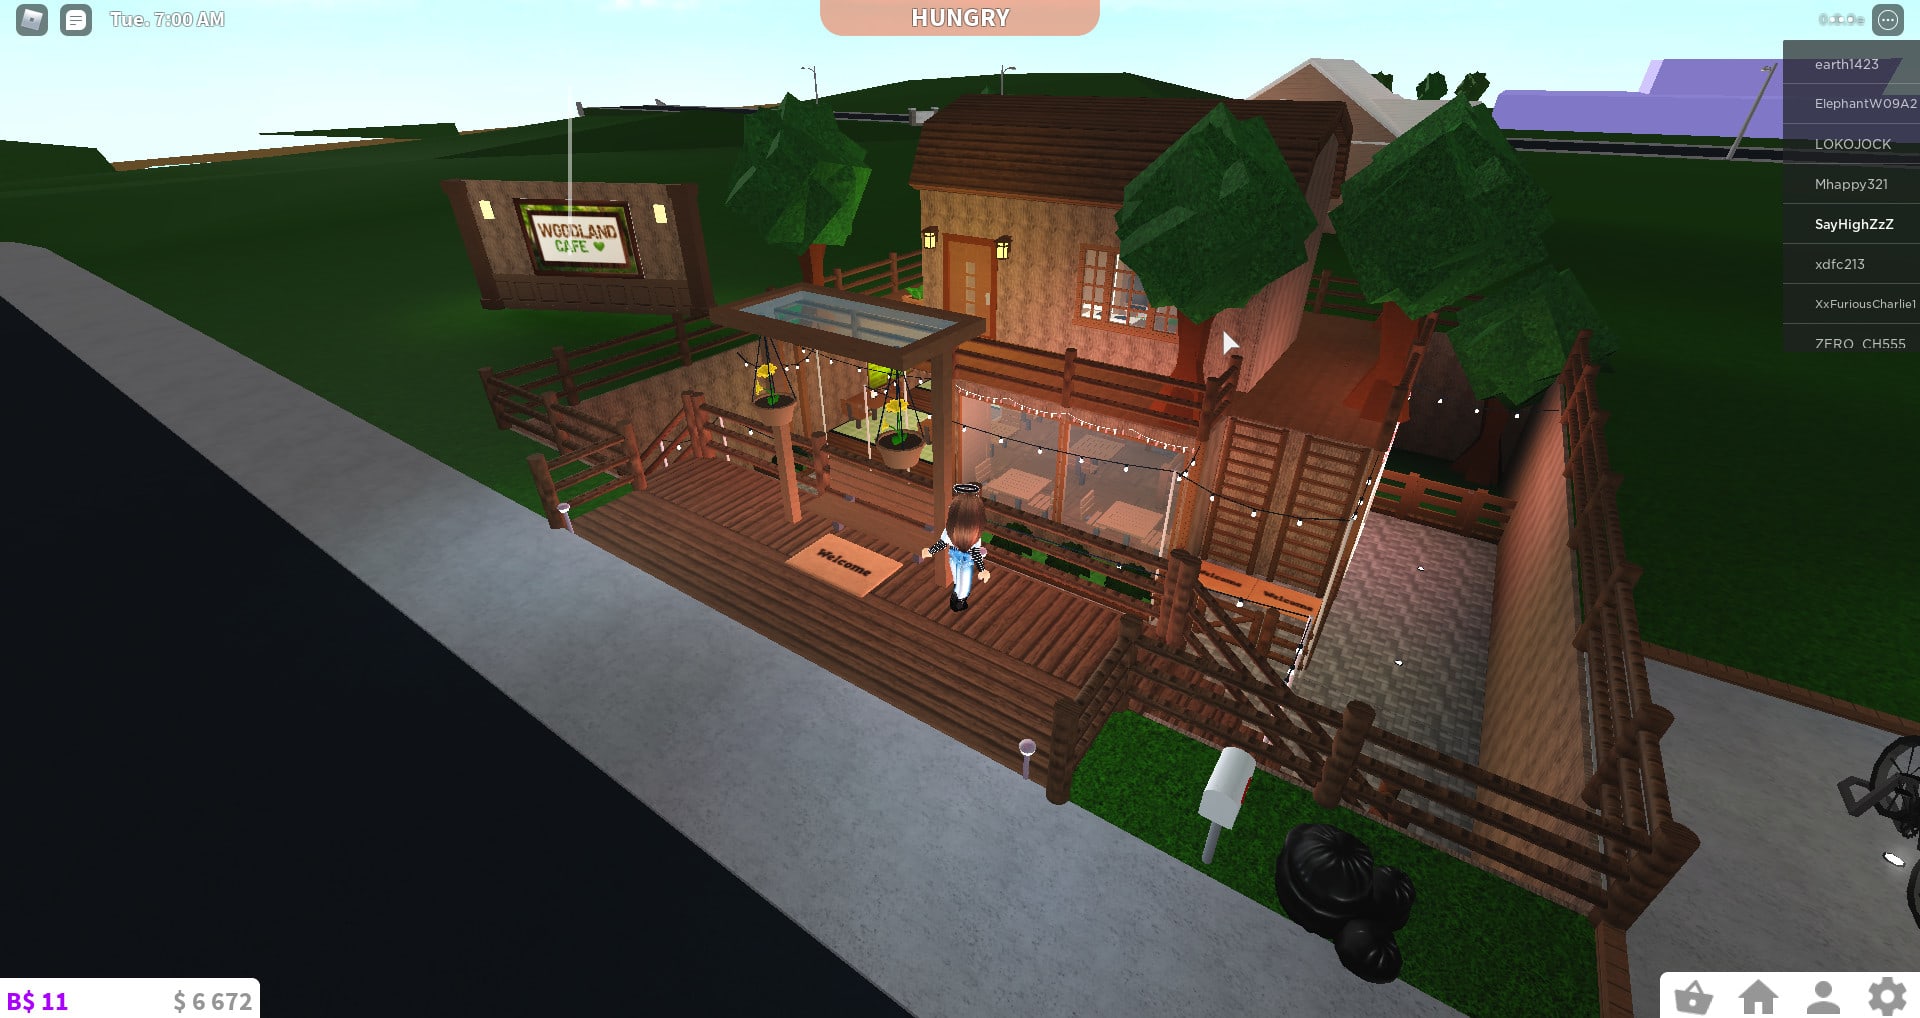 Build You A Nice Cafe Or Restaurant On Roblox Bloxburg By Sayhighzz Fiverr - how to make a cafe roblox bloxburg